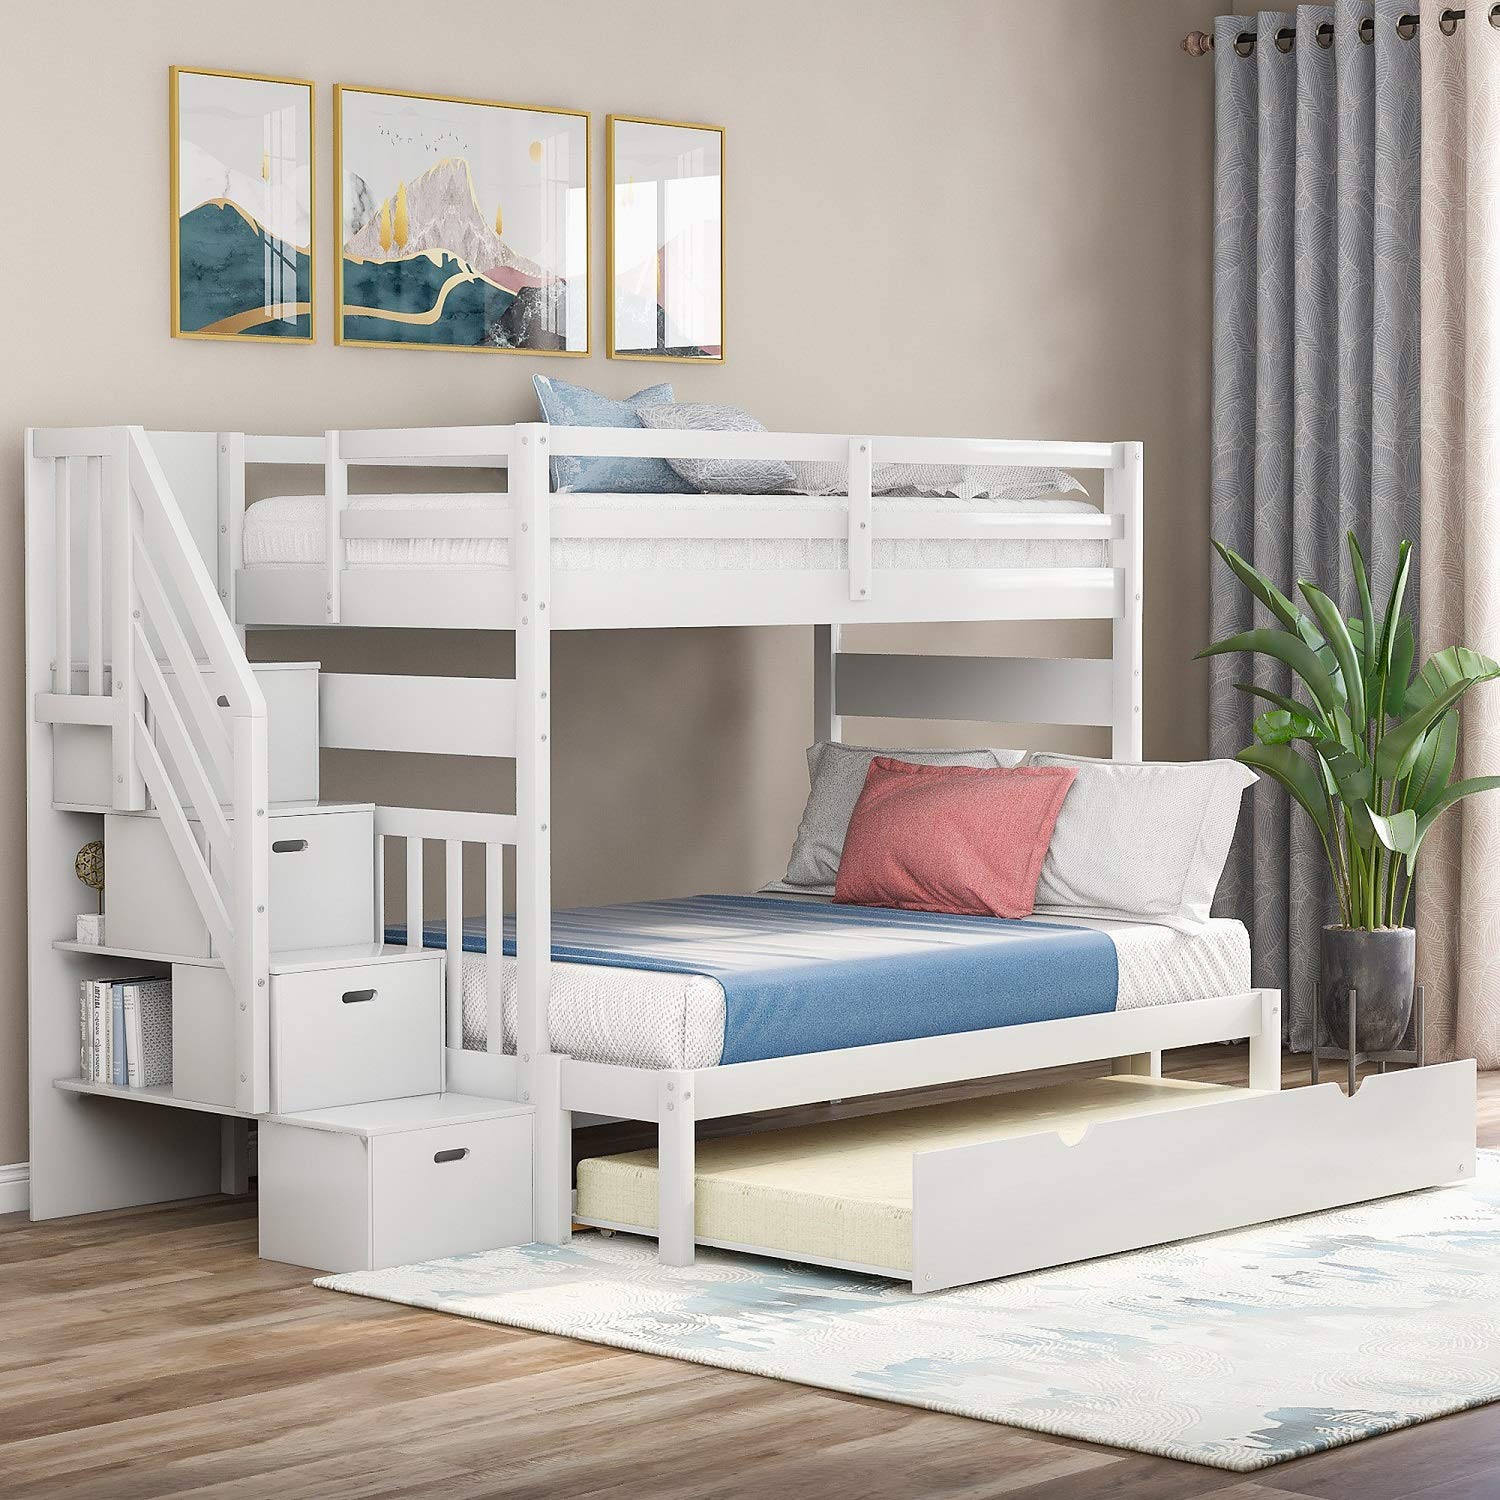 Rhomtree Bunk Bed with Trundle for Kids Twin Over TwinFull Bunk Beds with Trundle and Staircase, Solid Wood Trundle Bed with Rai